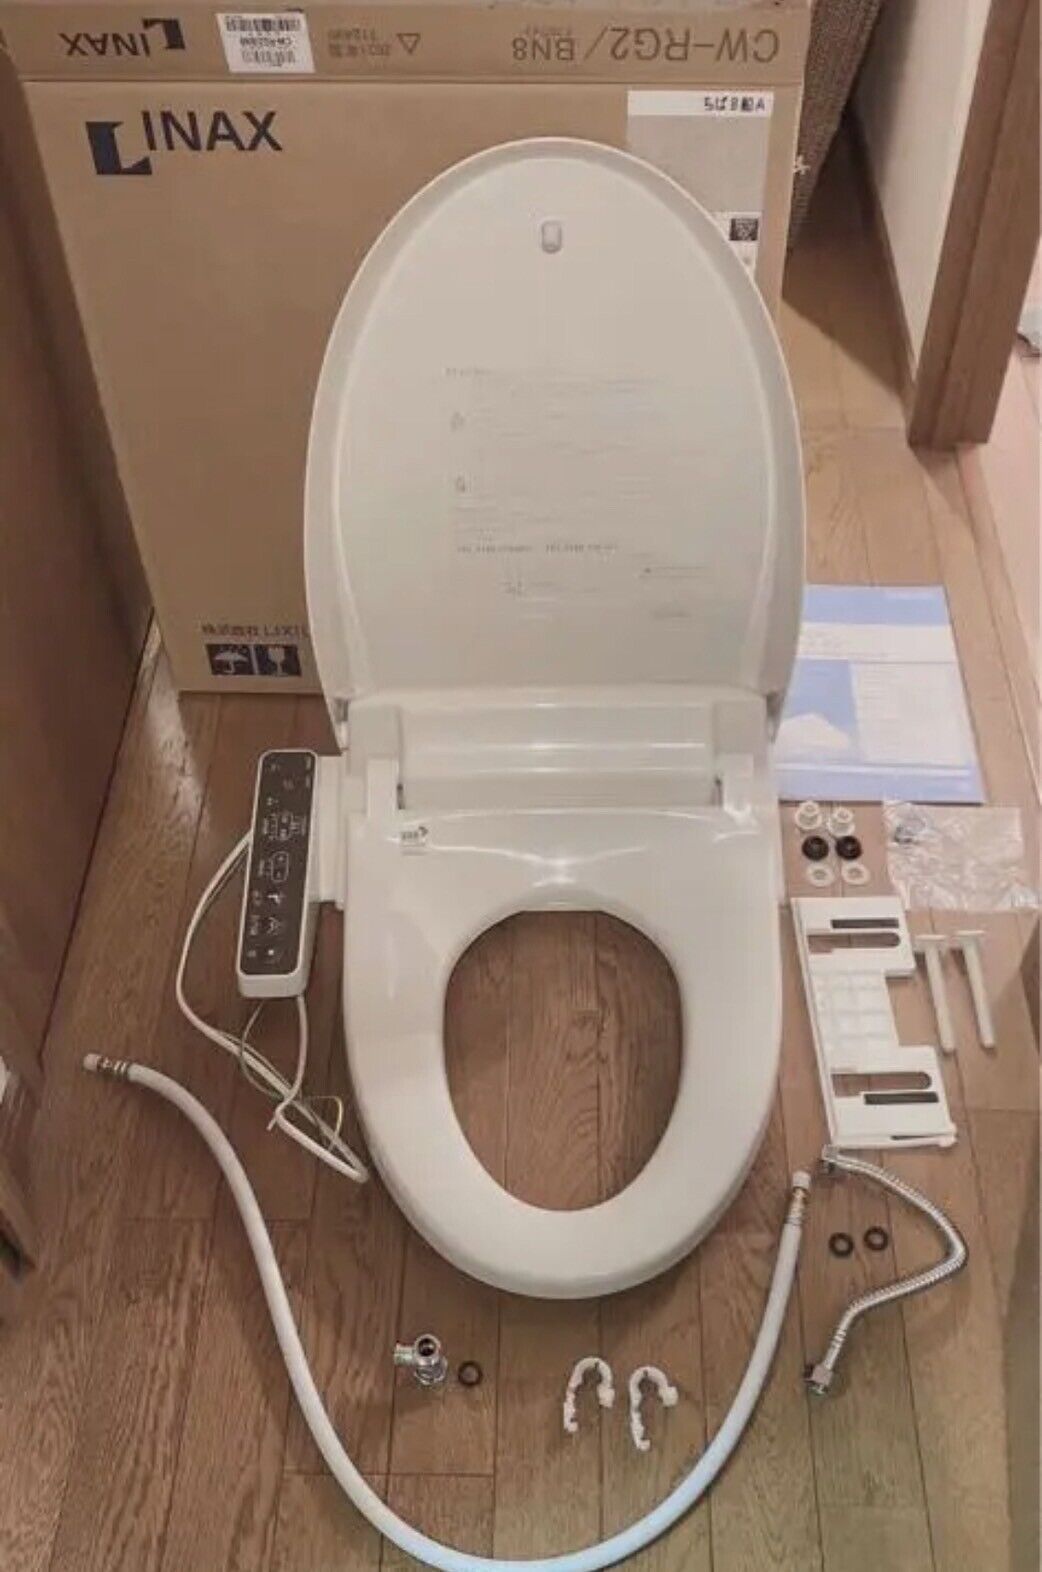 CW-RG2 INAX BN8 Electric Bidet Seat LIXIL with Deodorize Function 100V New　